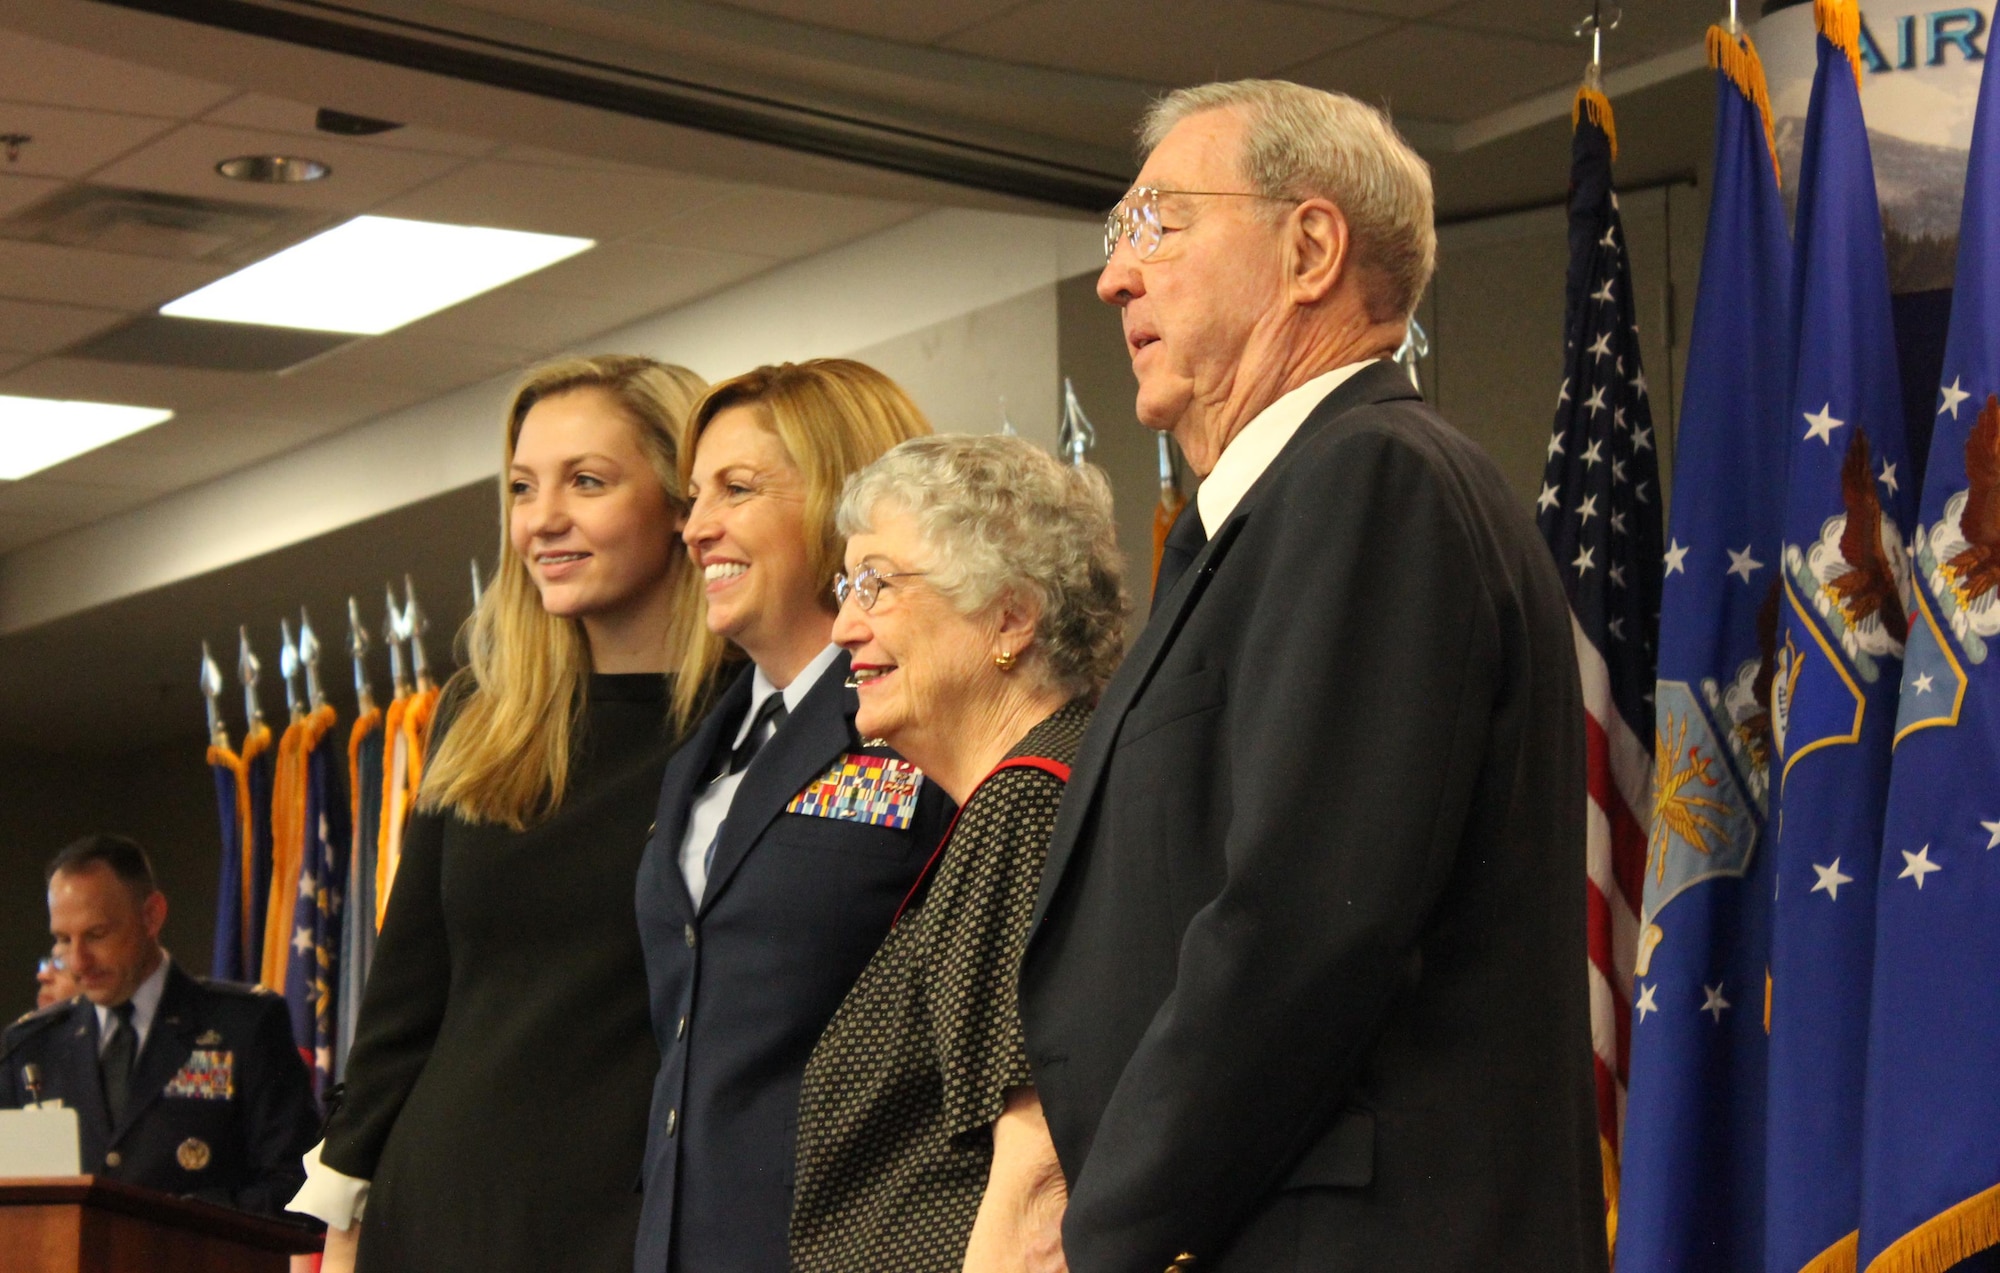 Brig. Gen. Ellen Moore (center), Commander, Air Reserve Personnel Center, stands with her daughter, Maggie, and her parents Sheila and Charley Pritchett during her promotion ceremony Jan. 27, 2017, at Buckley Air Force Base, Colo. Moore is the first female brigadier general to command ARPC. (U.S. Air Force photo by Master Sgt. Beth Anschutz)